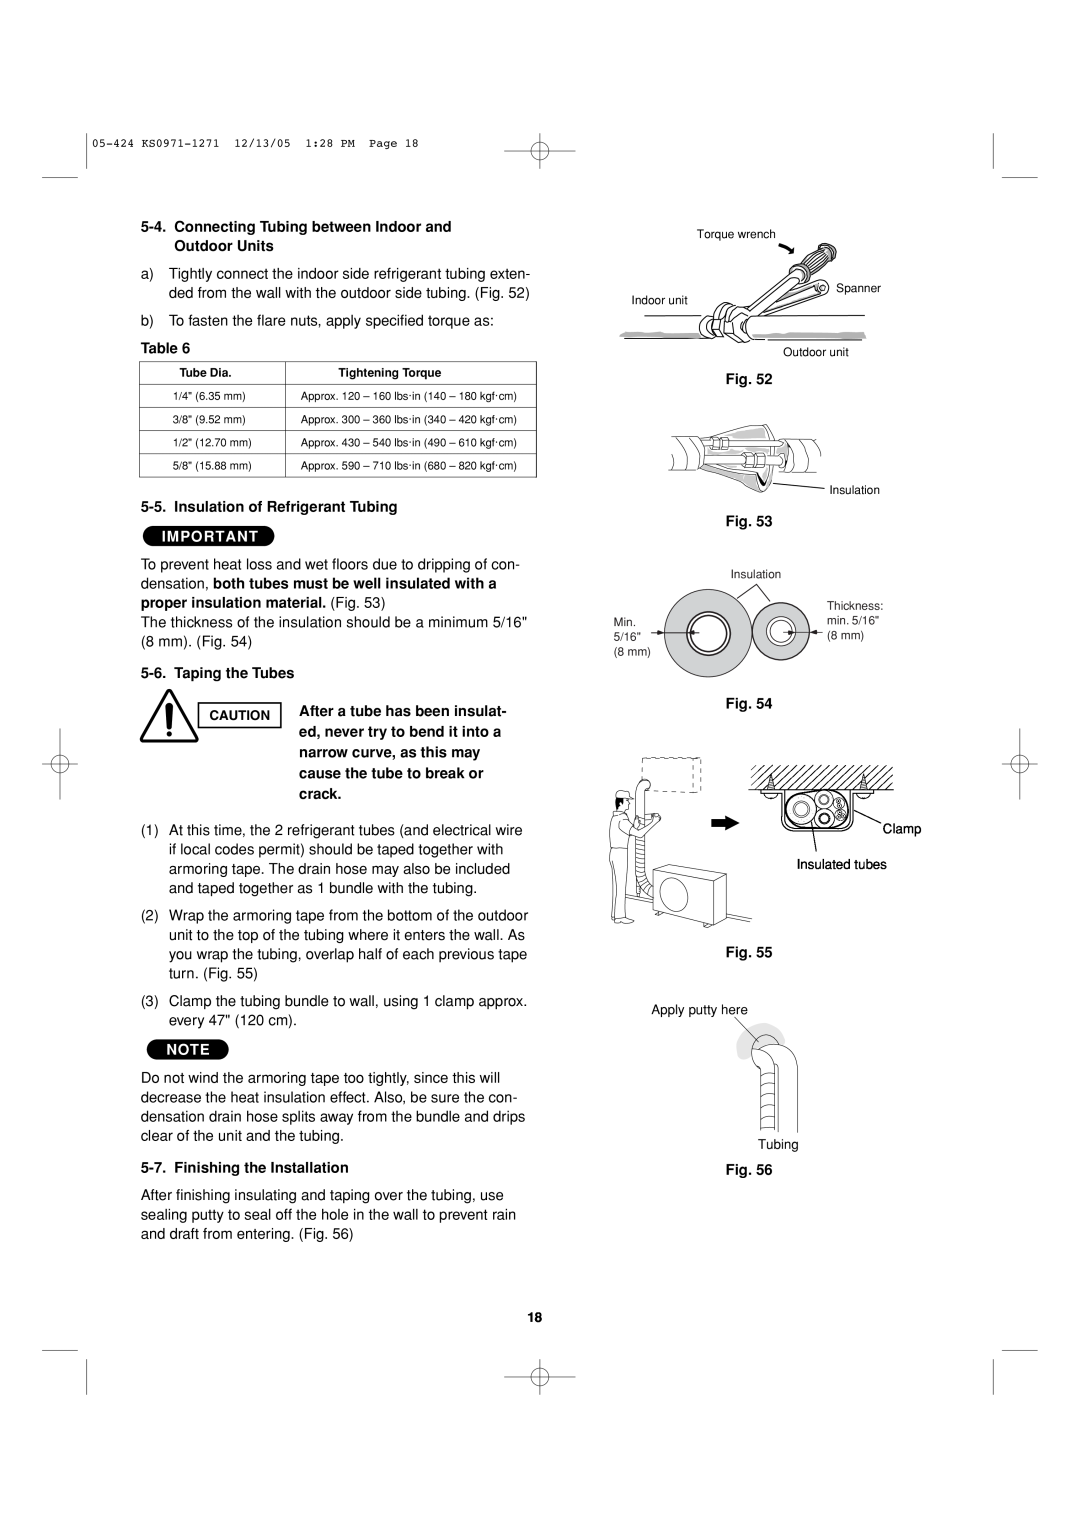 Sanyo Cool/Dry installation instructions 